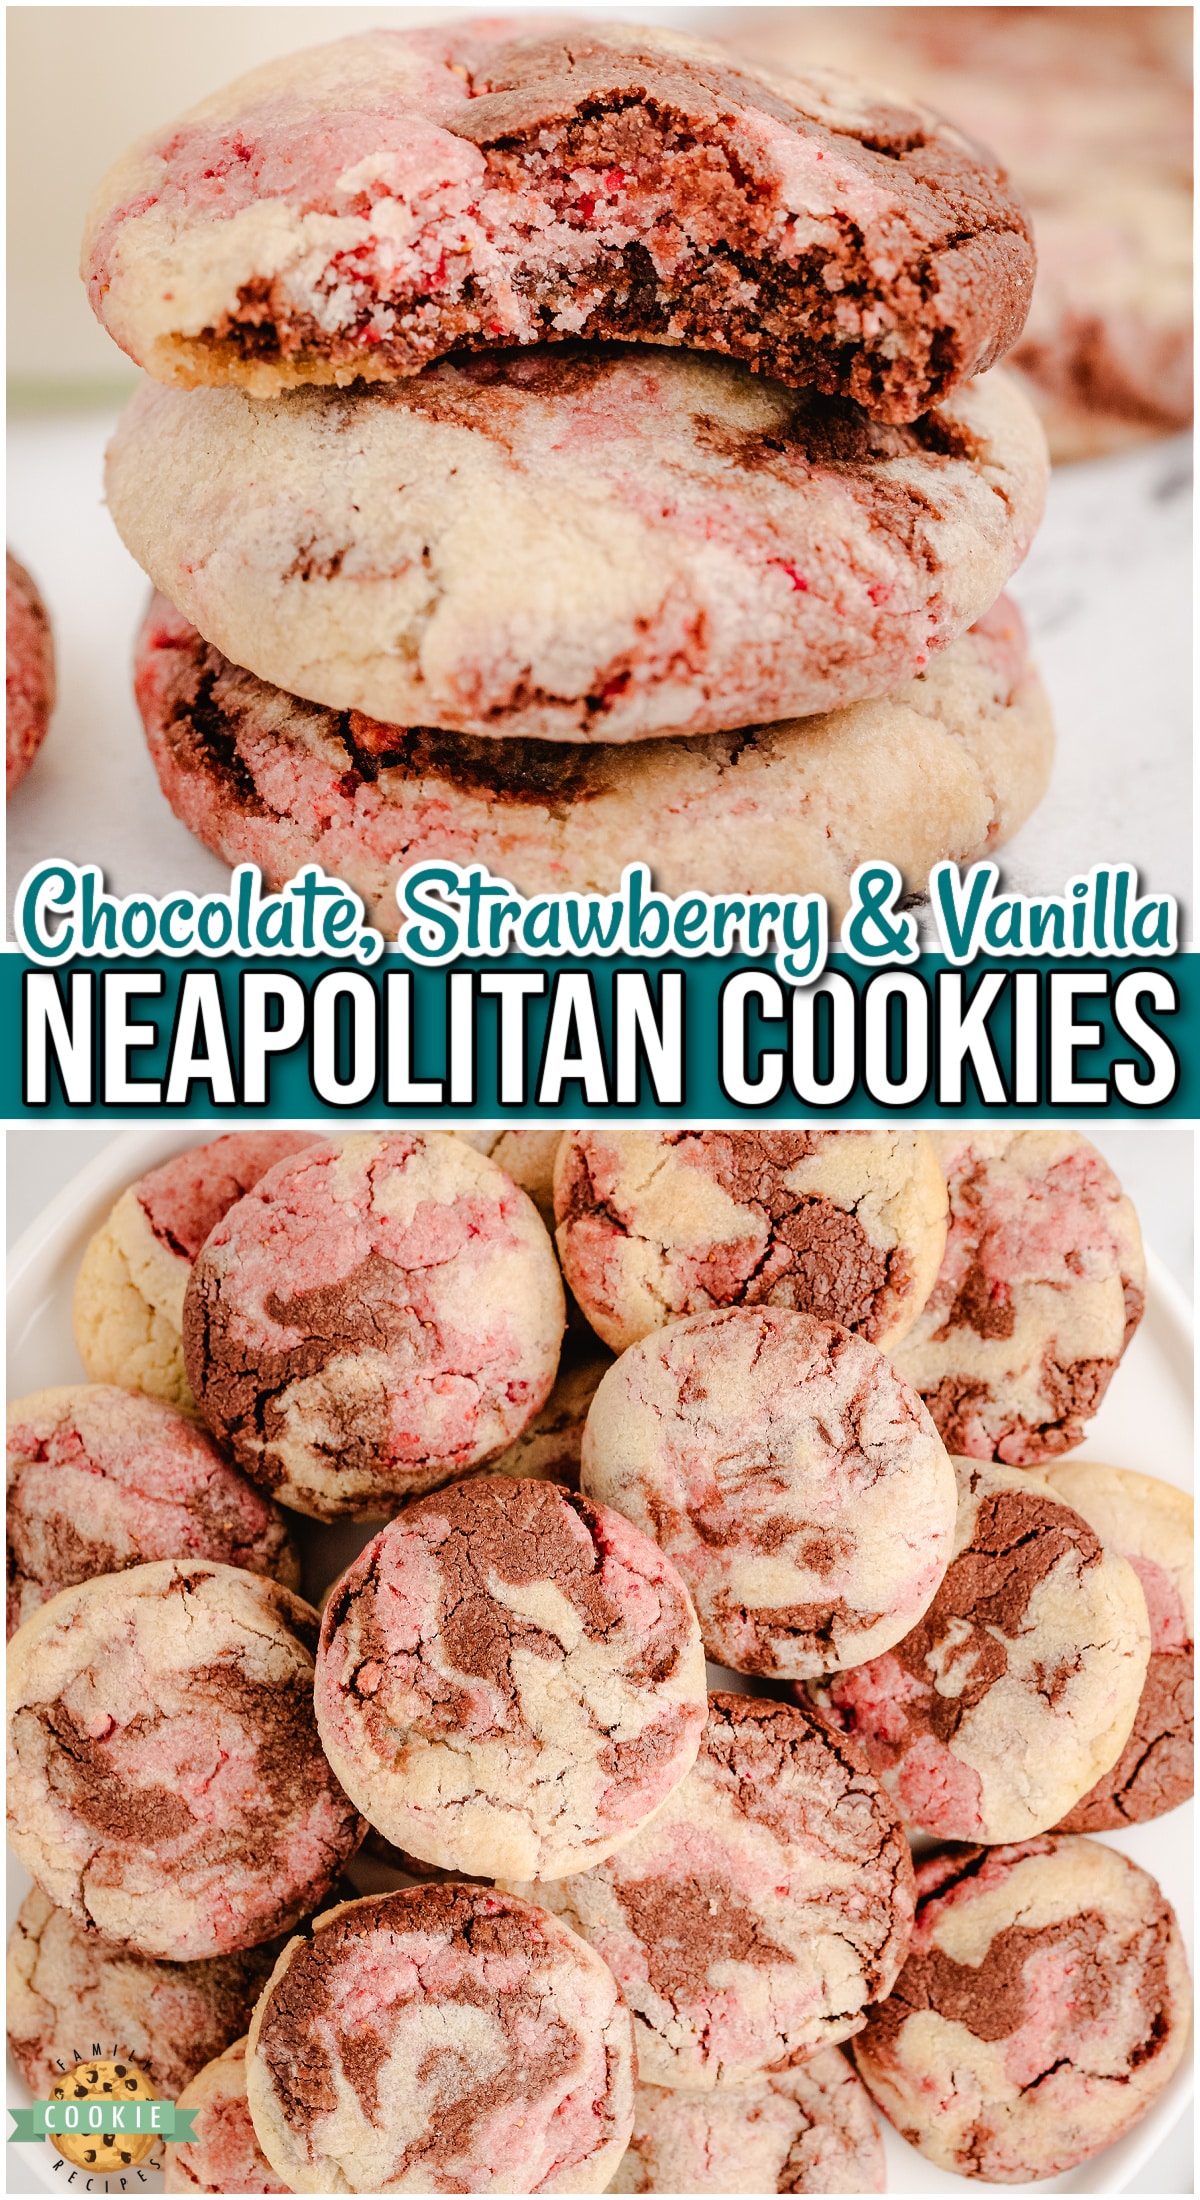 Neapolitan cookies are soft & chewy cookies that combine strawberry, chocolate & vanilla flavors, just like the popular ice cream flavor!